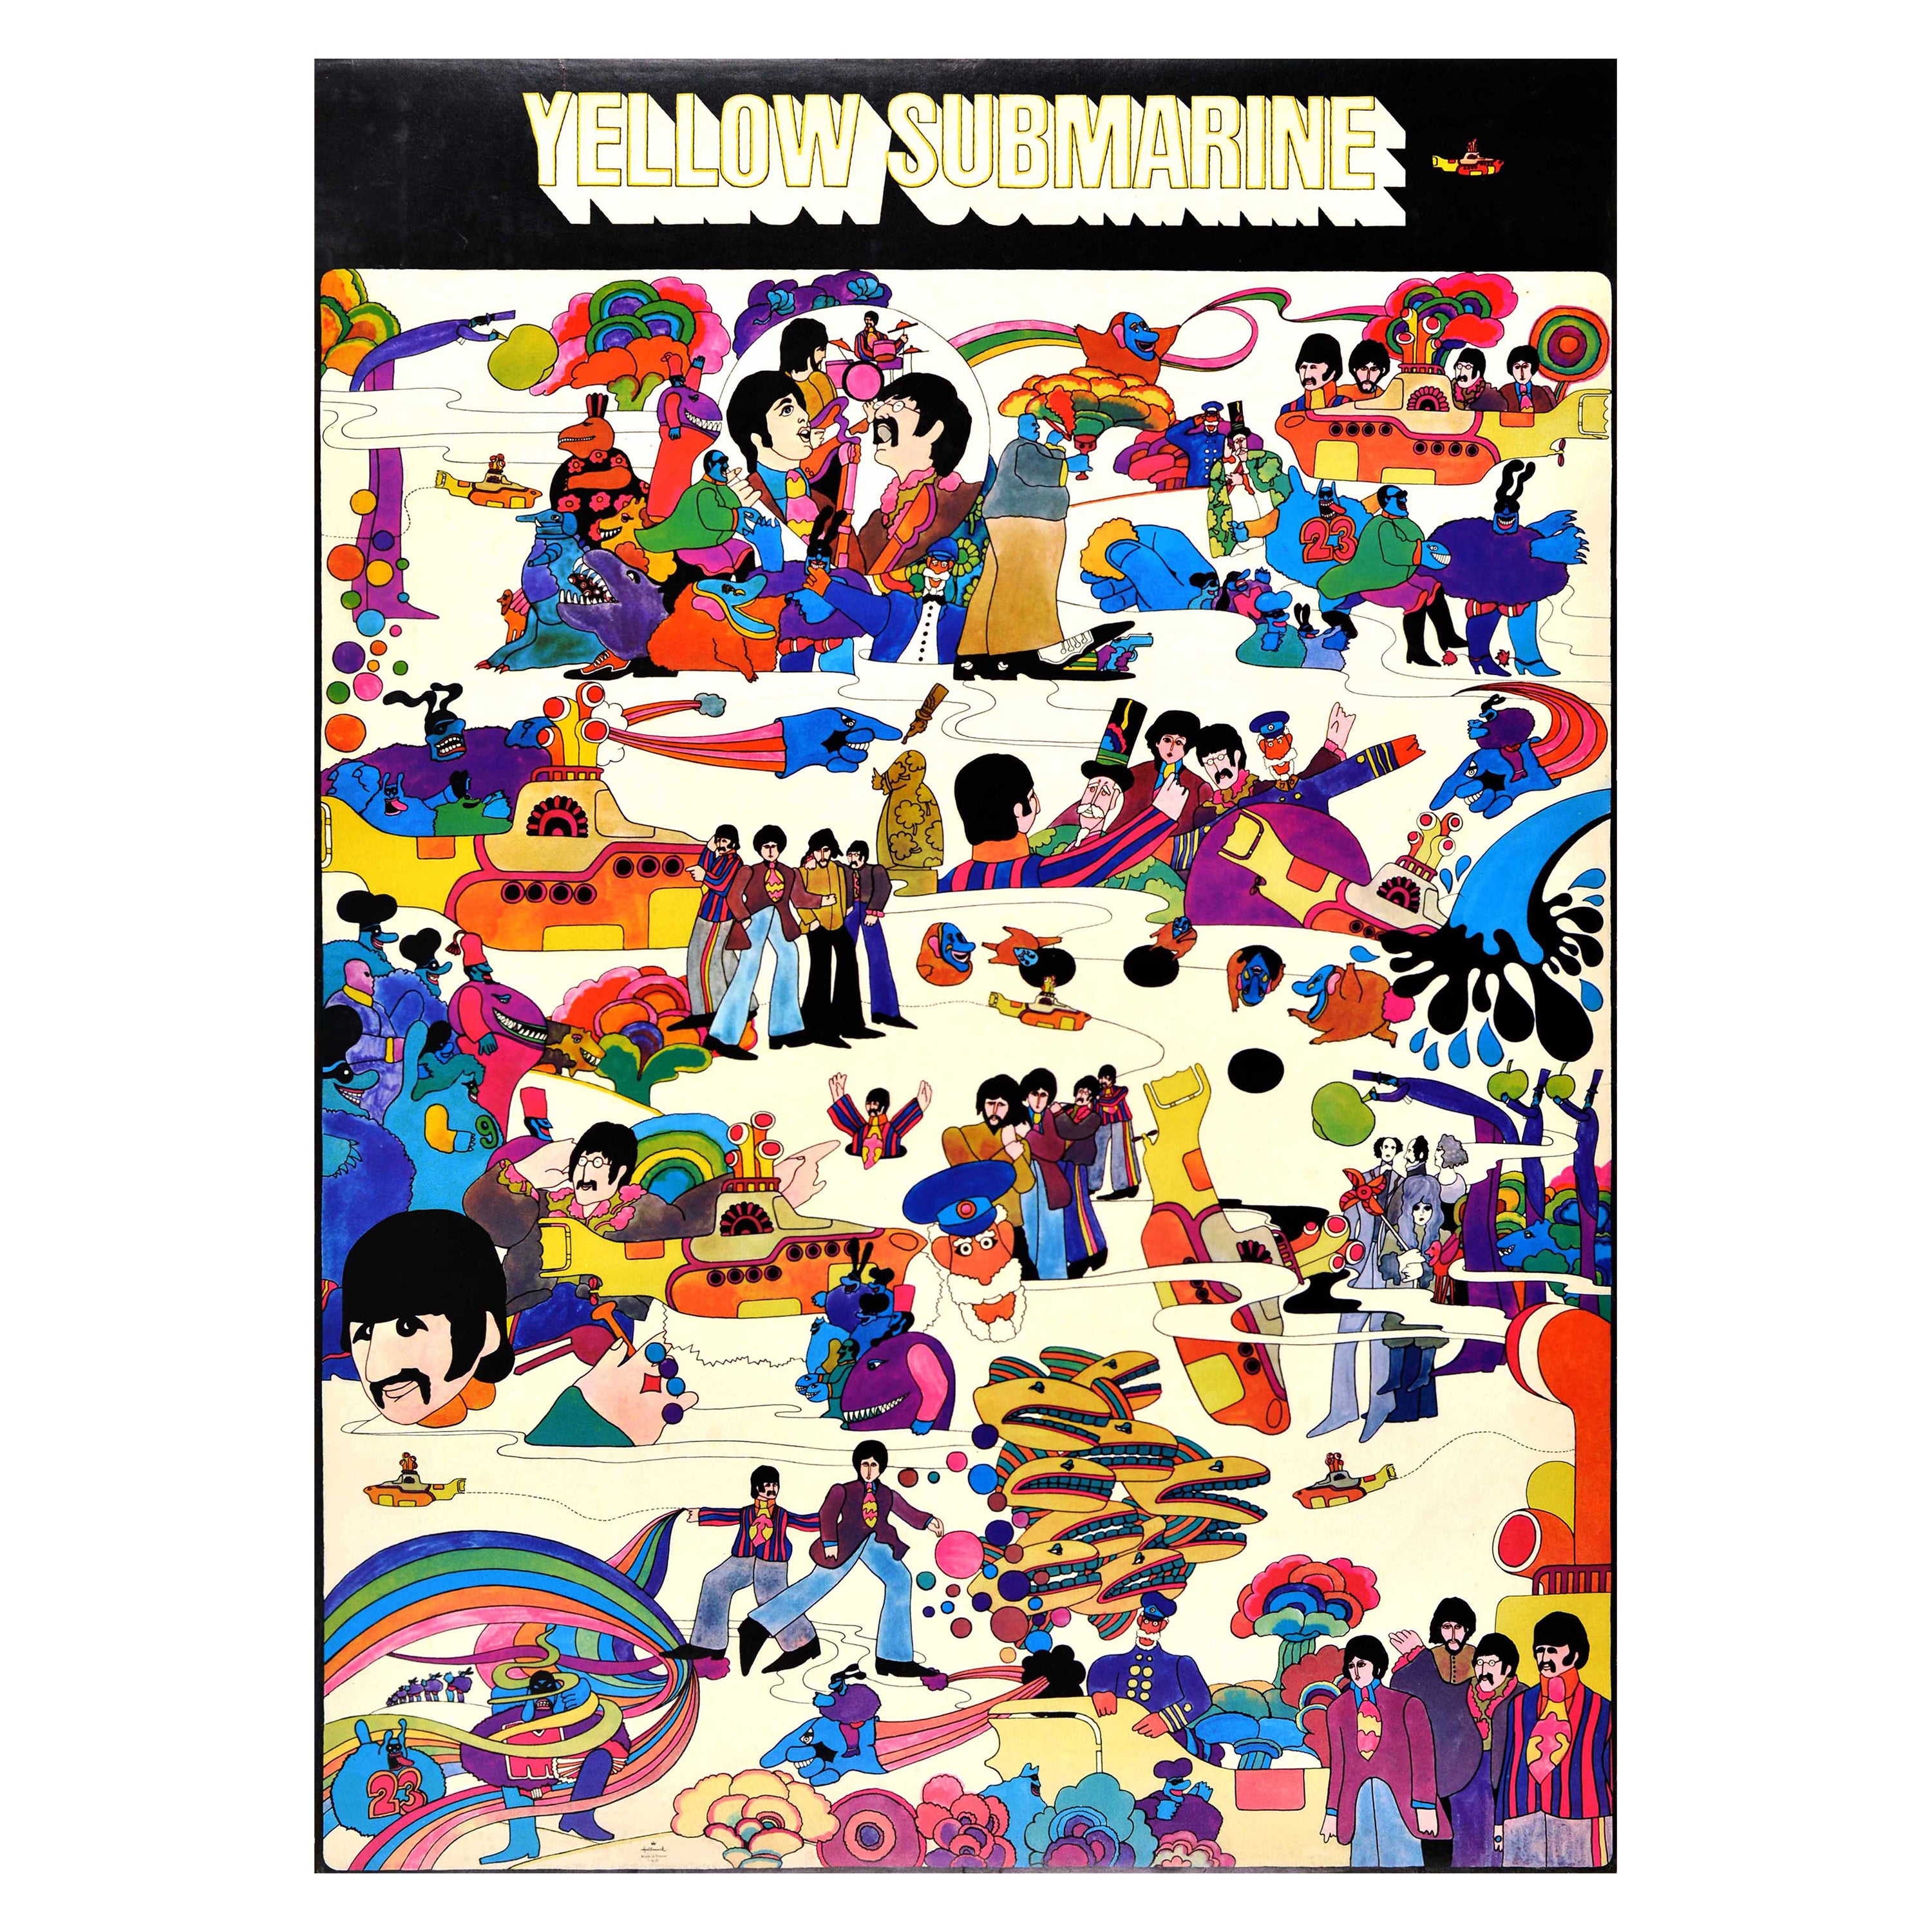 Original Vintage Poster Yellow Submarine The Beatles Sgt. Pepper Music Movie Art For Sale